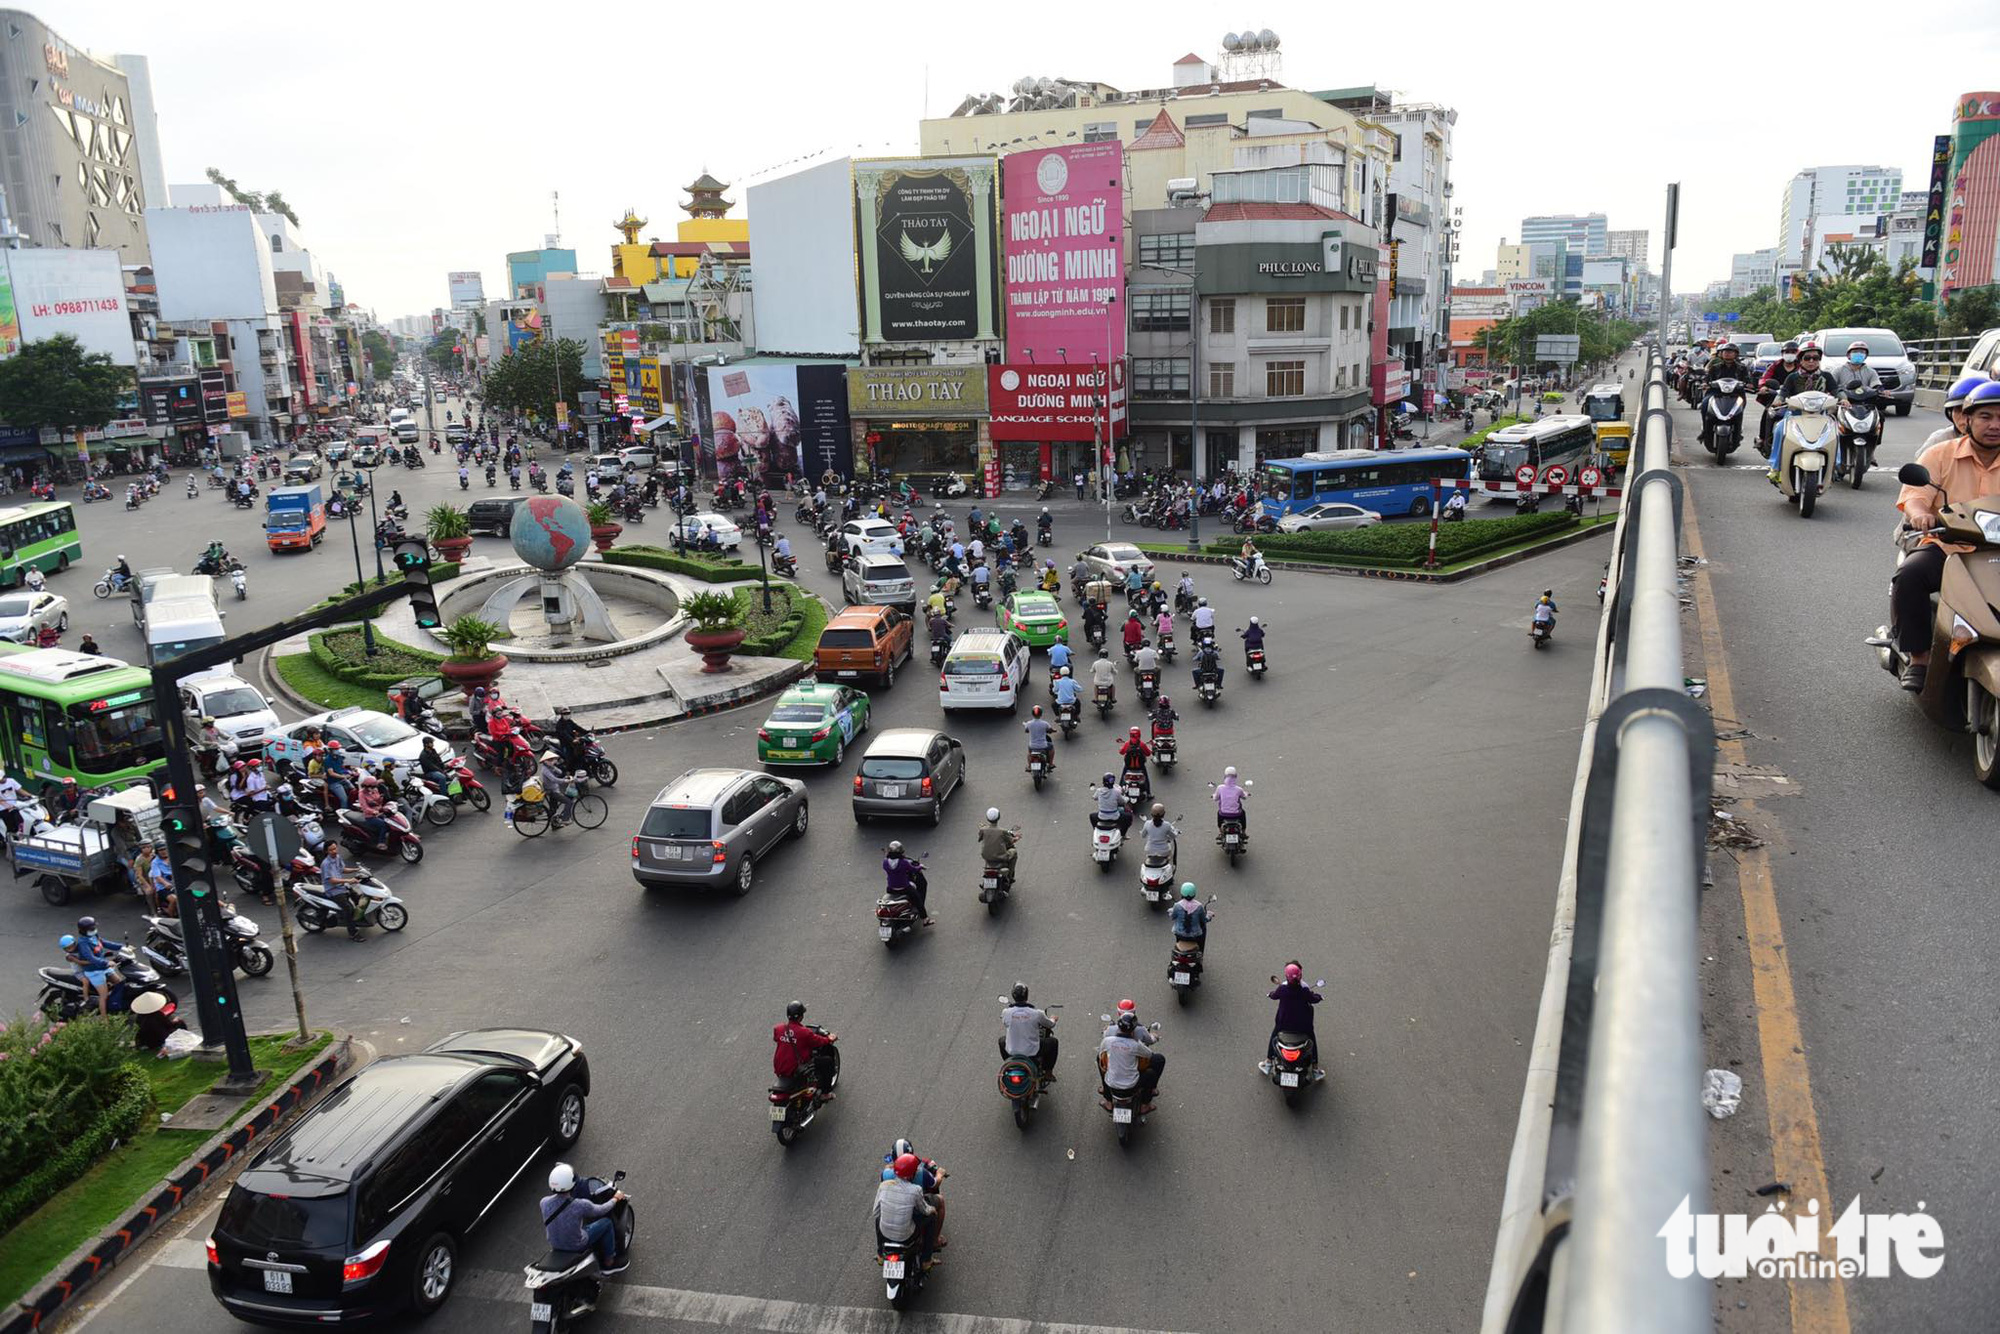 The roundabout is an intersection for large streets, such as Cong Hoa, Hoang Van Thu, Tran Quoc Hoan, Le Van Sy, and Bui Thi Xuan streets. The roundabout is easily recognized as it has a blue- and red-colored globe with a diameter of around two meters.